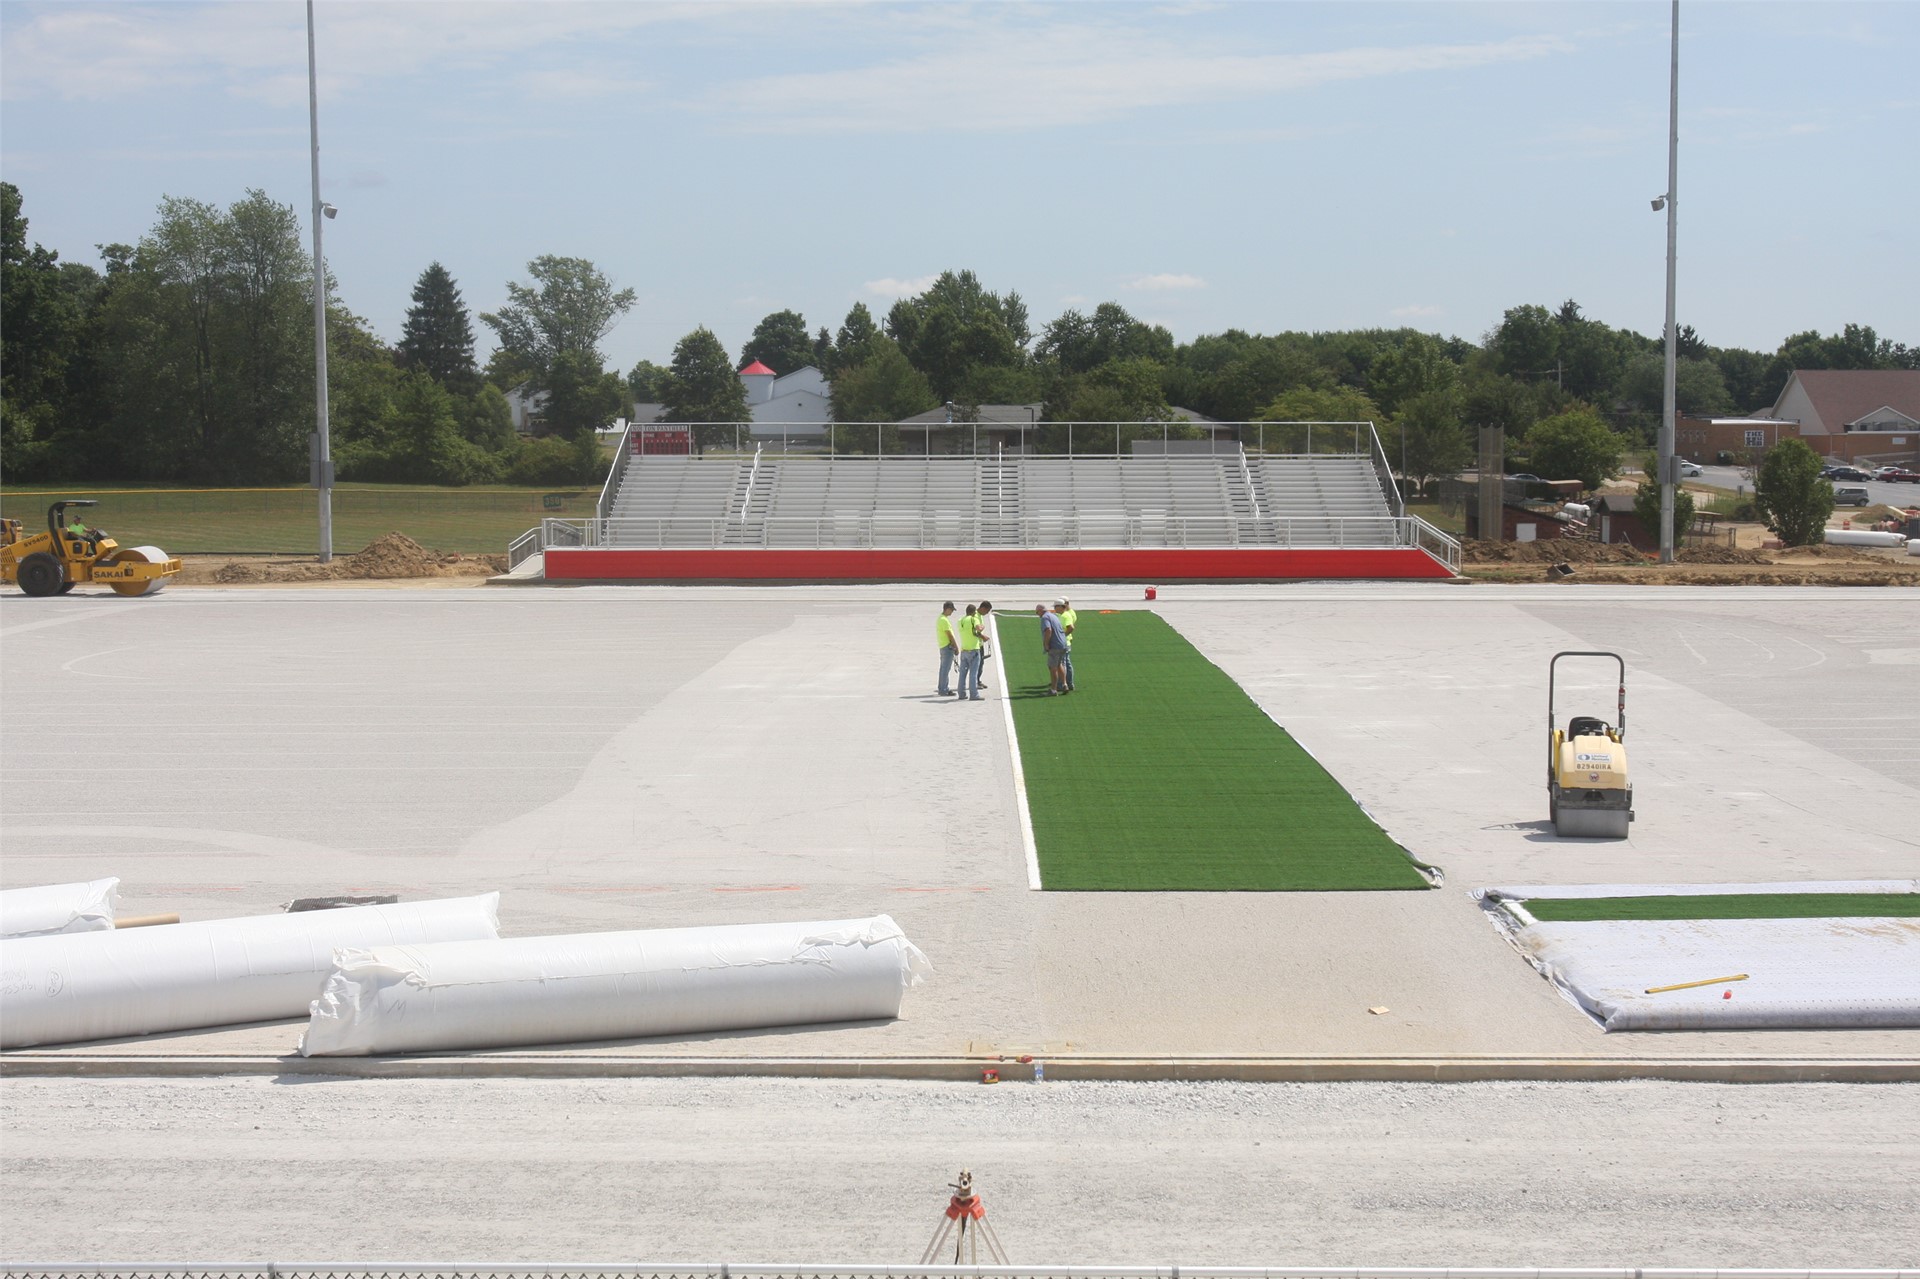 The first roll of turf being installed on the field